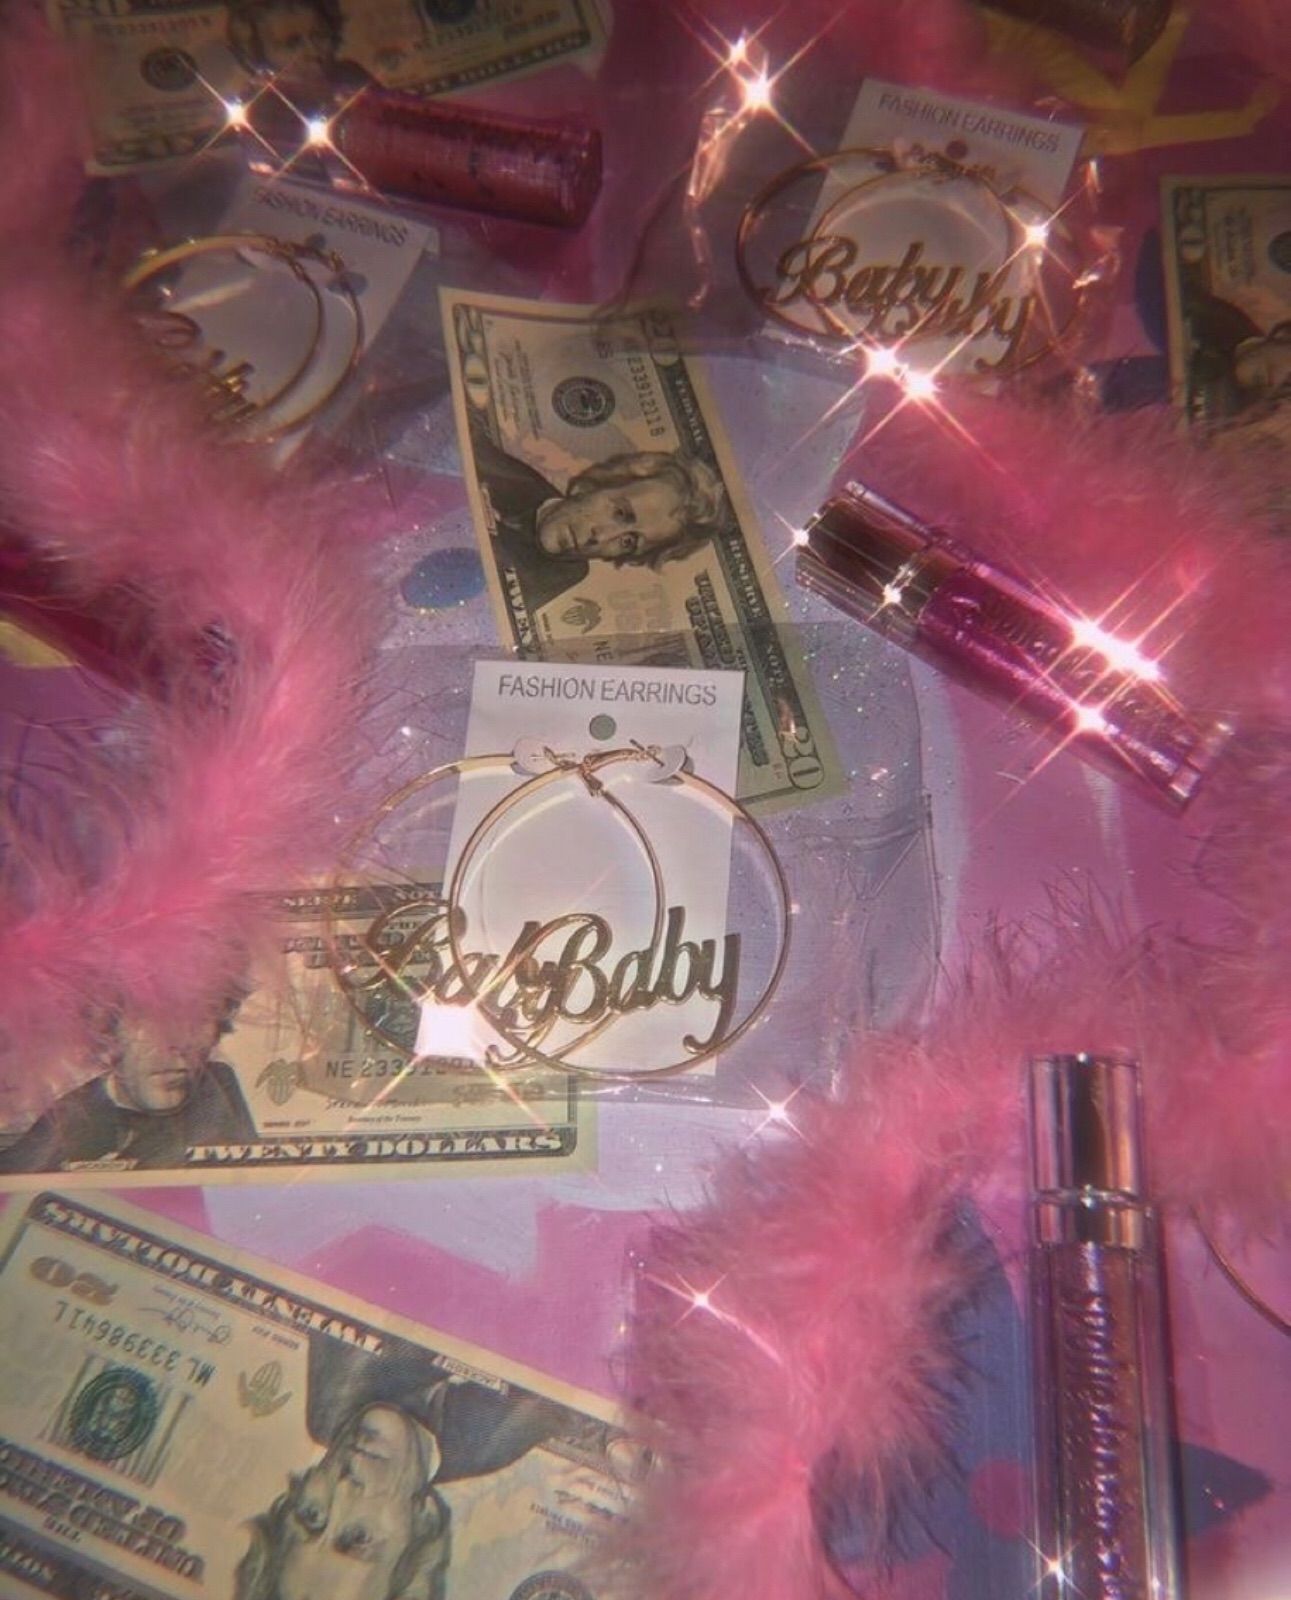 A pink feather boa and money on the table - Money